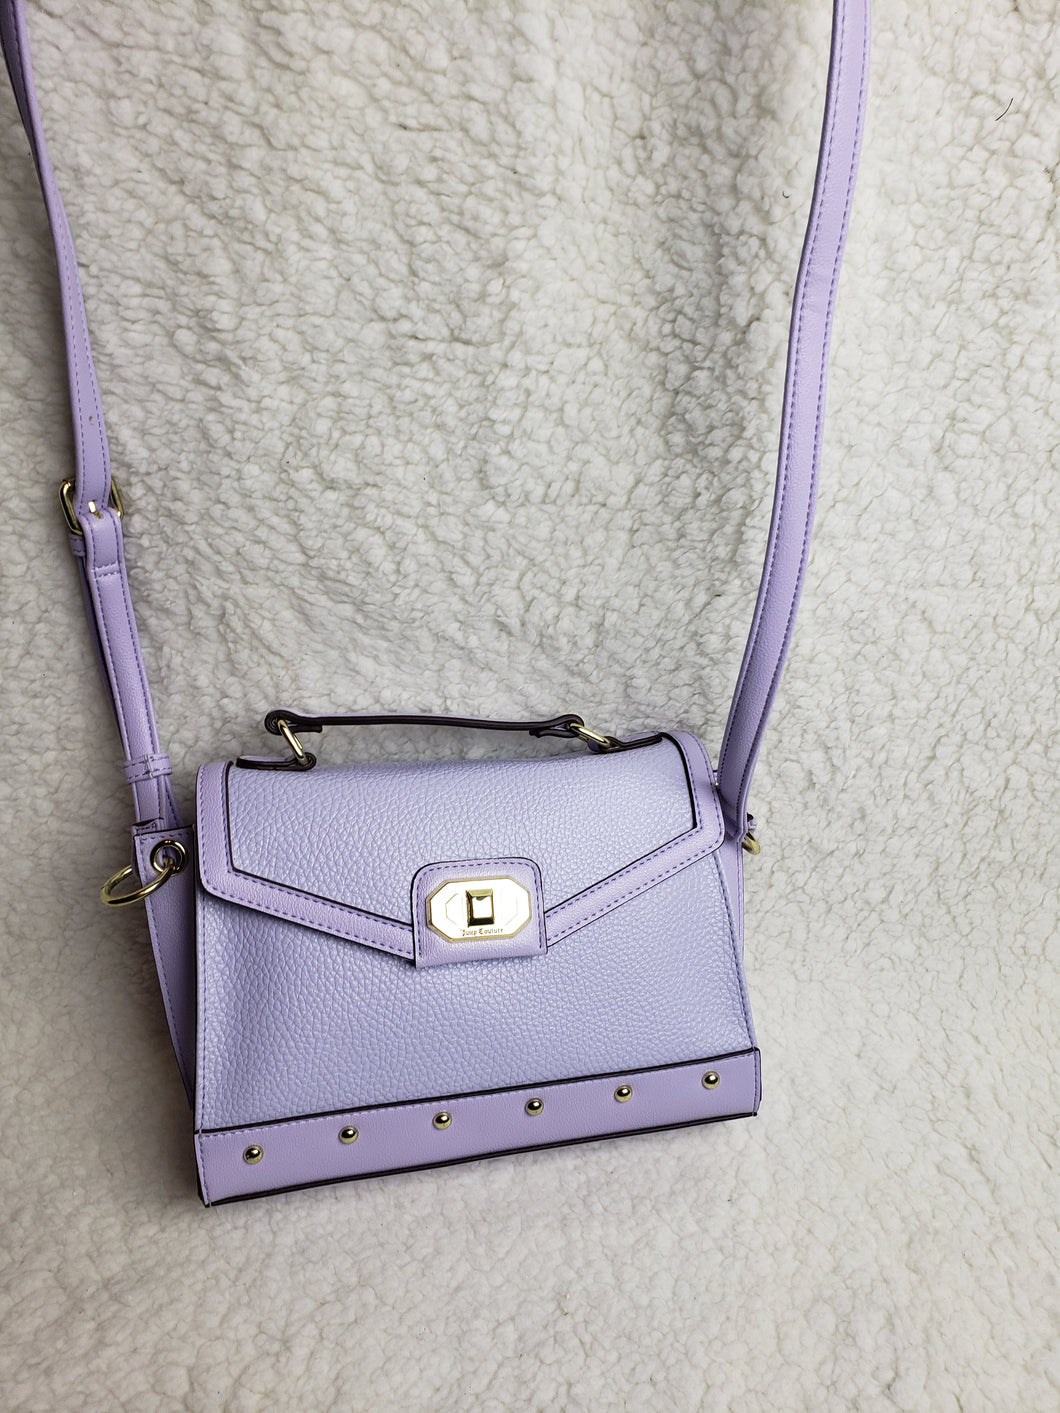 Juicy Couture lilac pocketbook